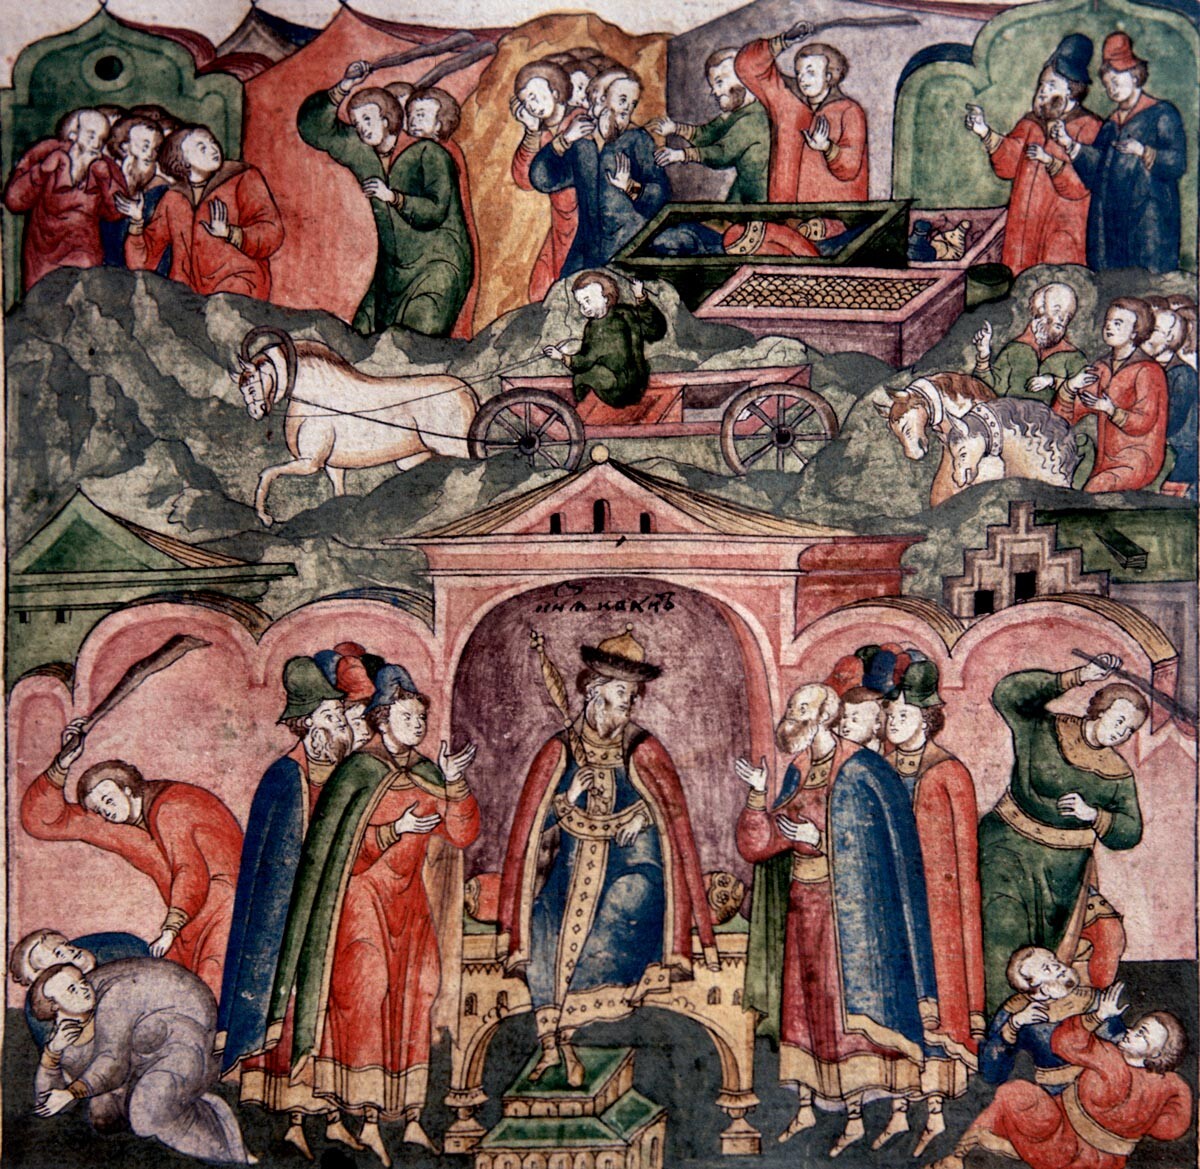 Reproduction of the miniature 